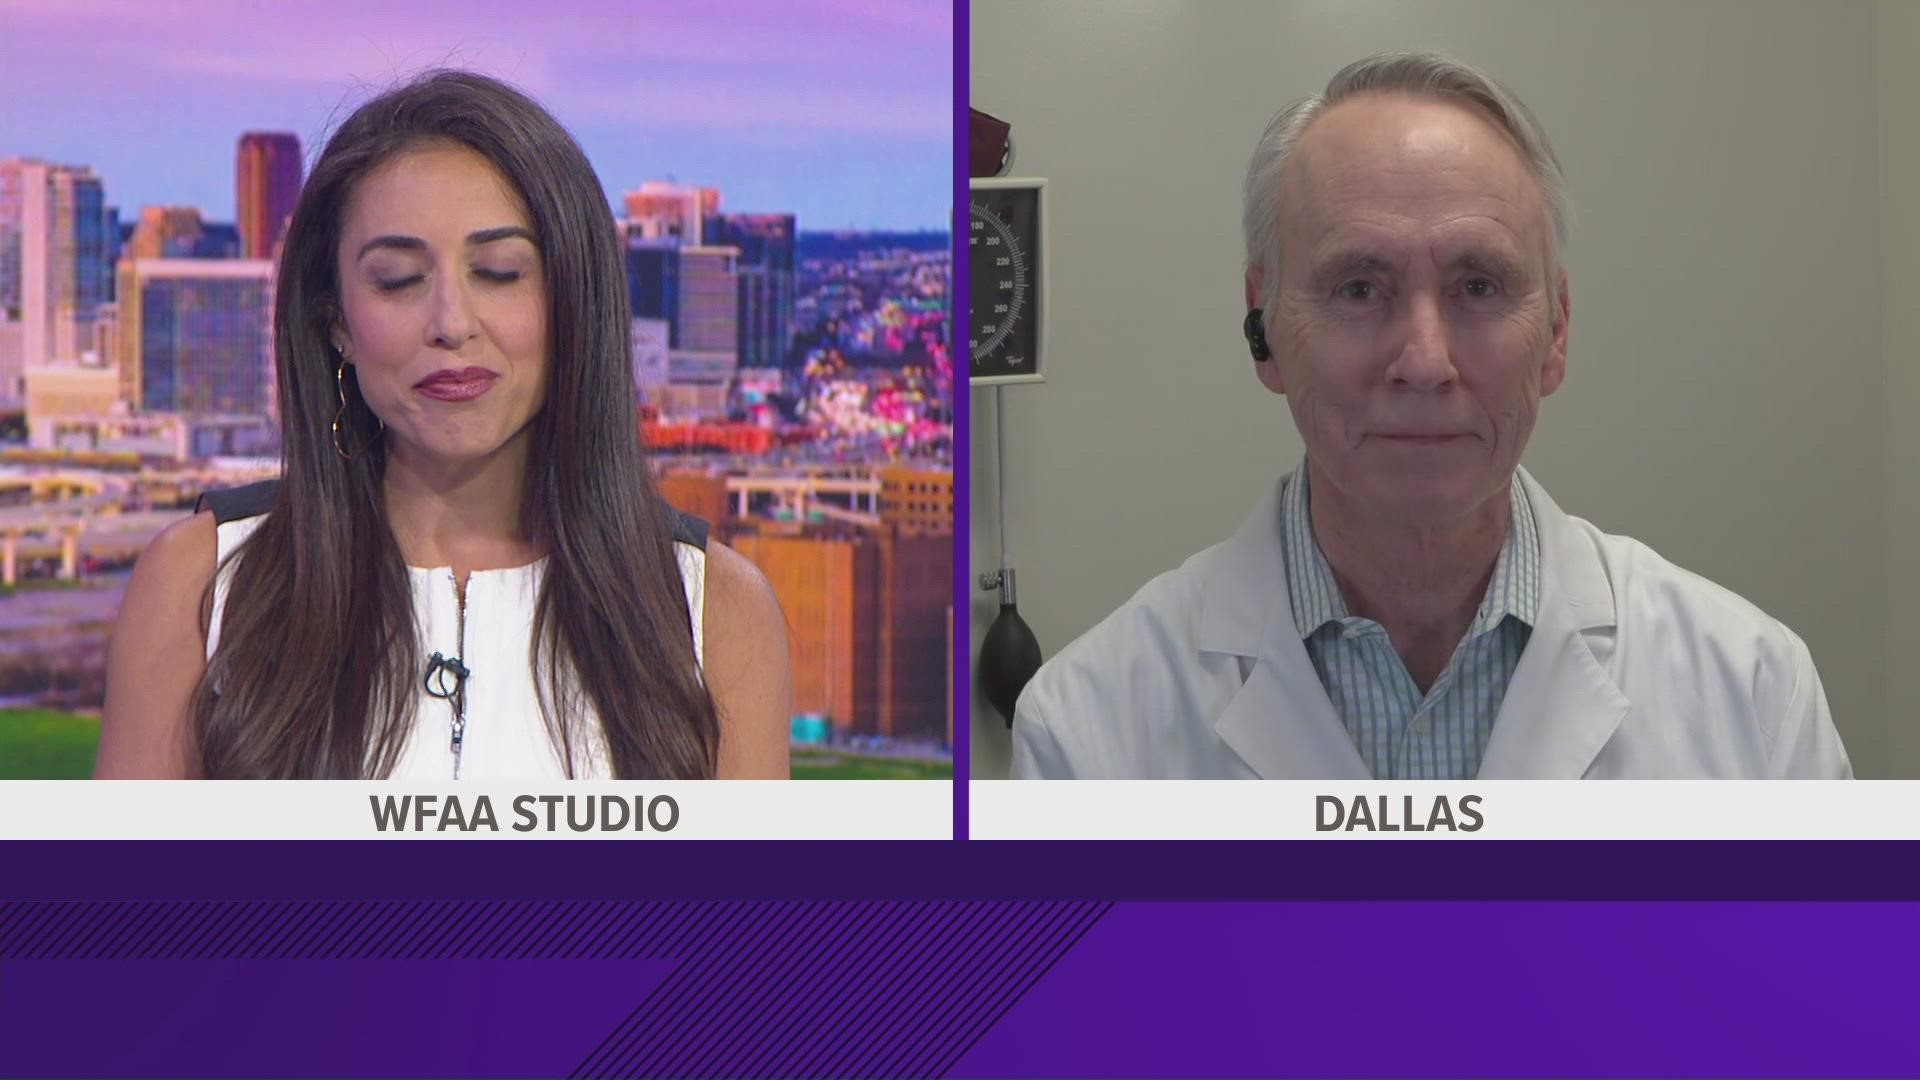 Dr. David Winter weighs in on the latest health headlines.